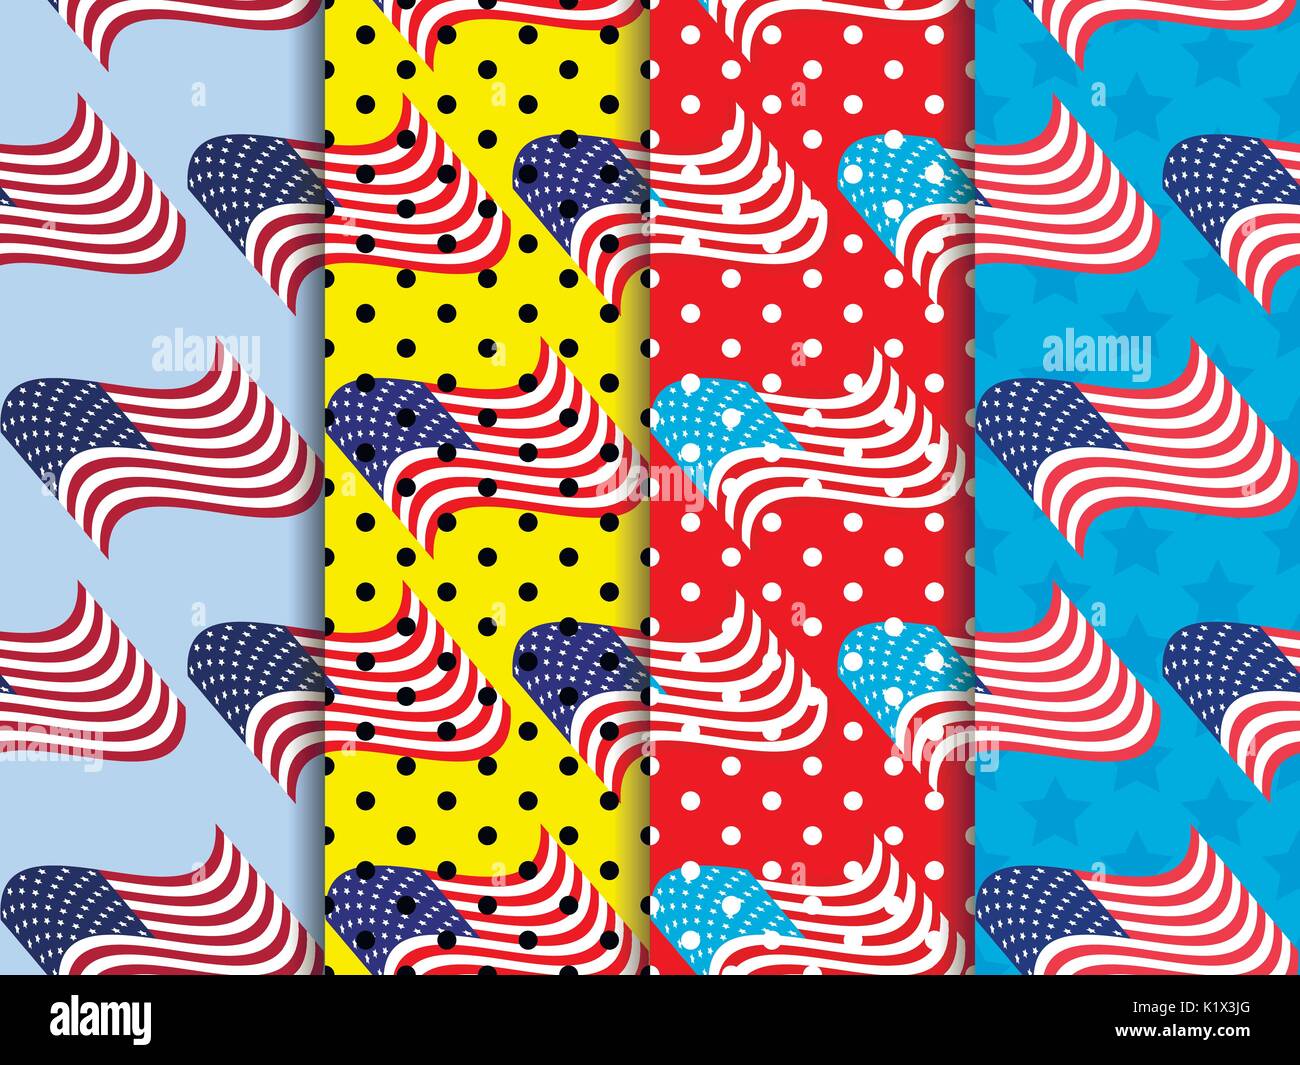 American flag seamless pattern with black dots. Pop art dotted ...